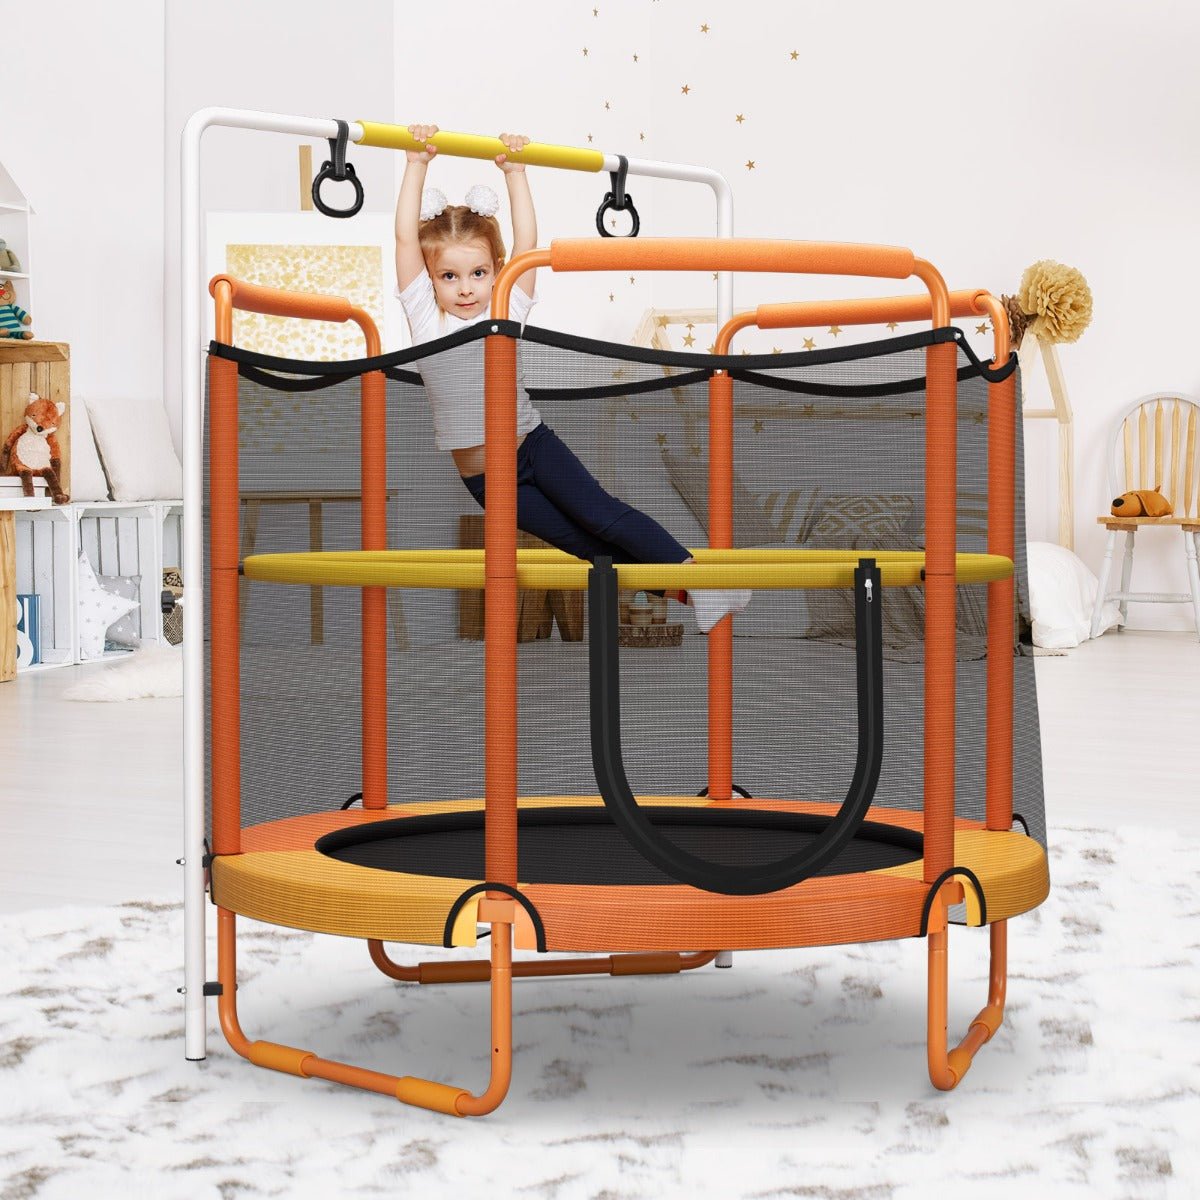 Active Playtime: 152cm Kids Trampoline 3-in-1 Game Set with Enclosure Net